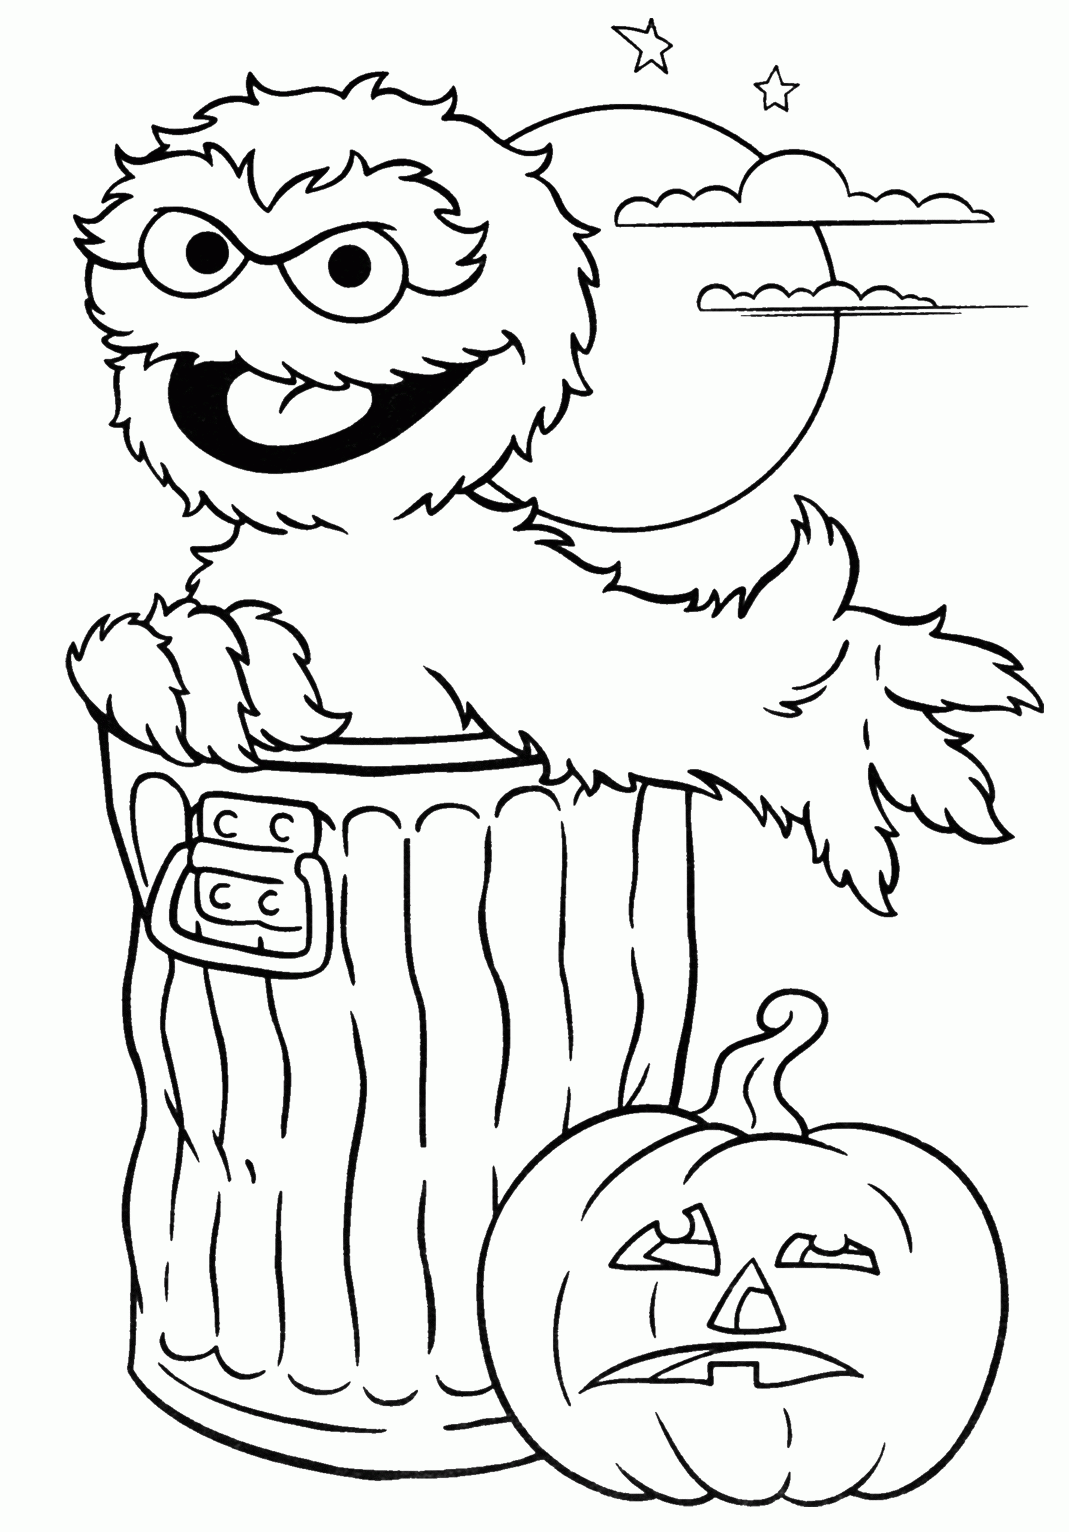 oscar-the-grouch-coloring-pages-free-clip-art-library